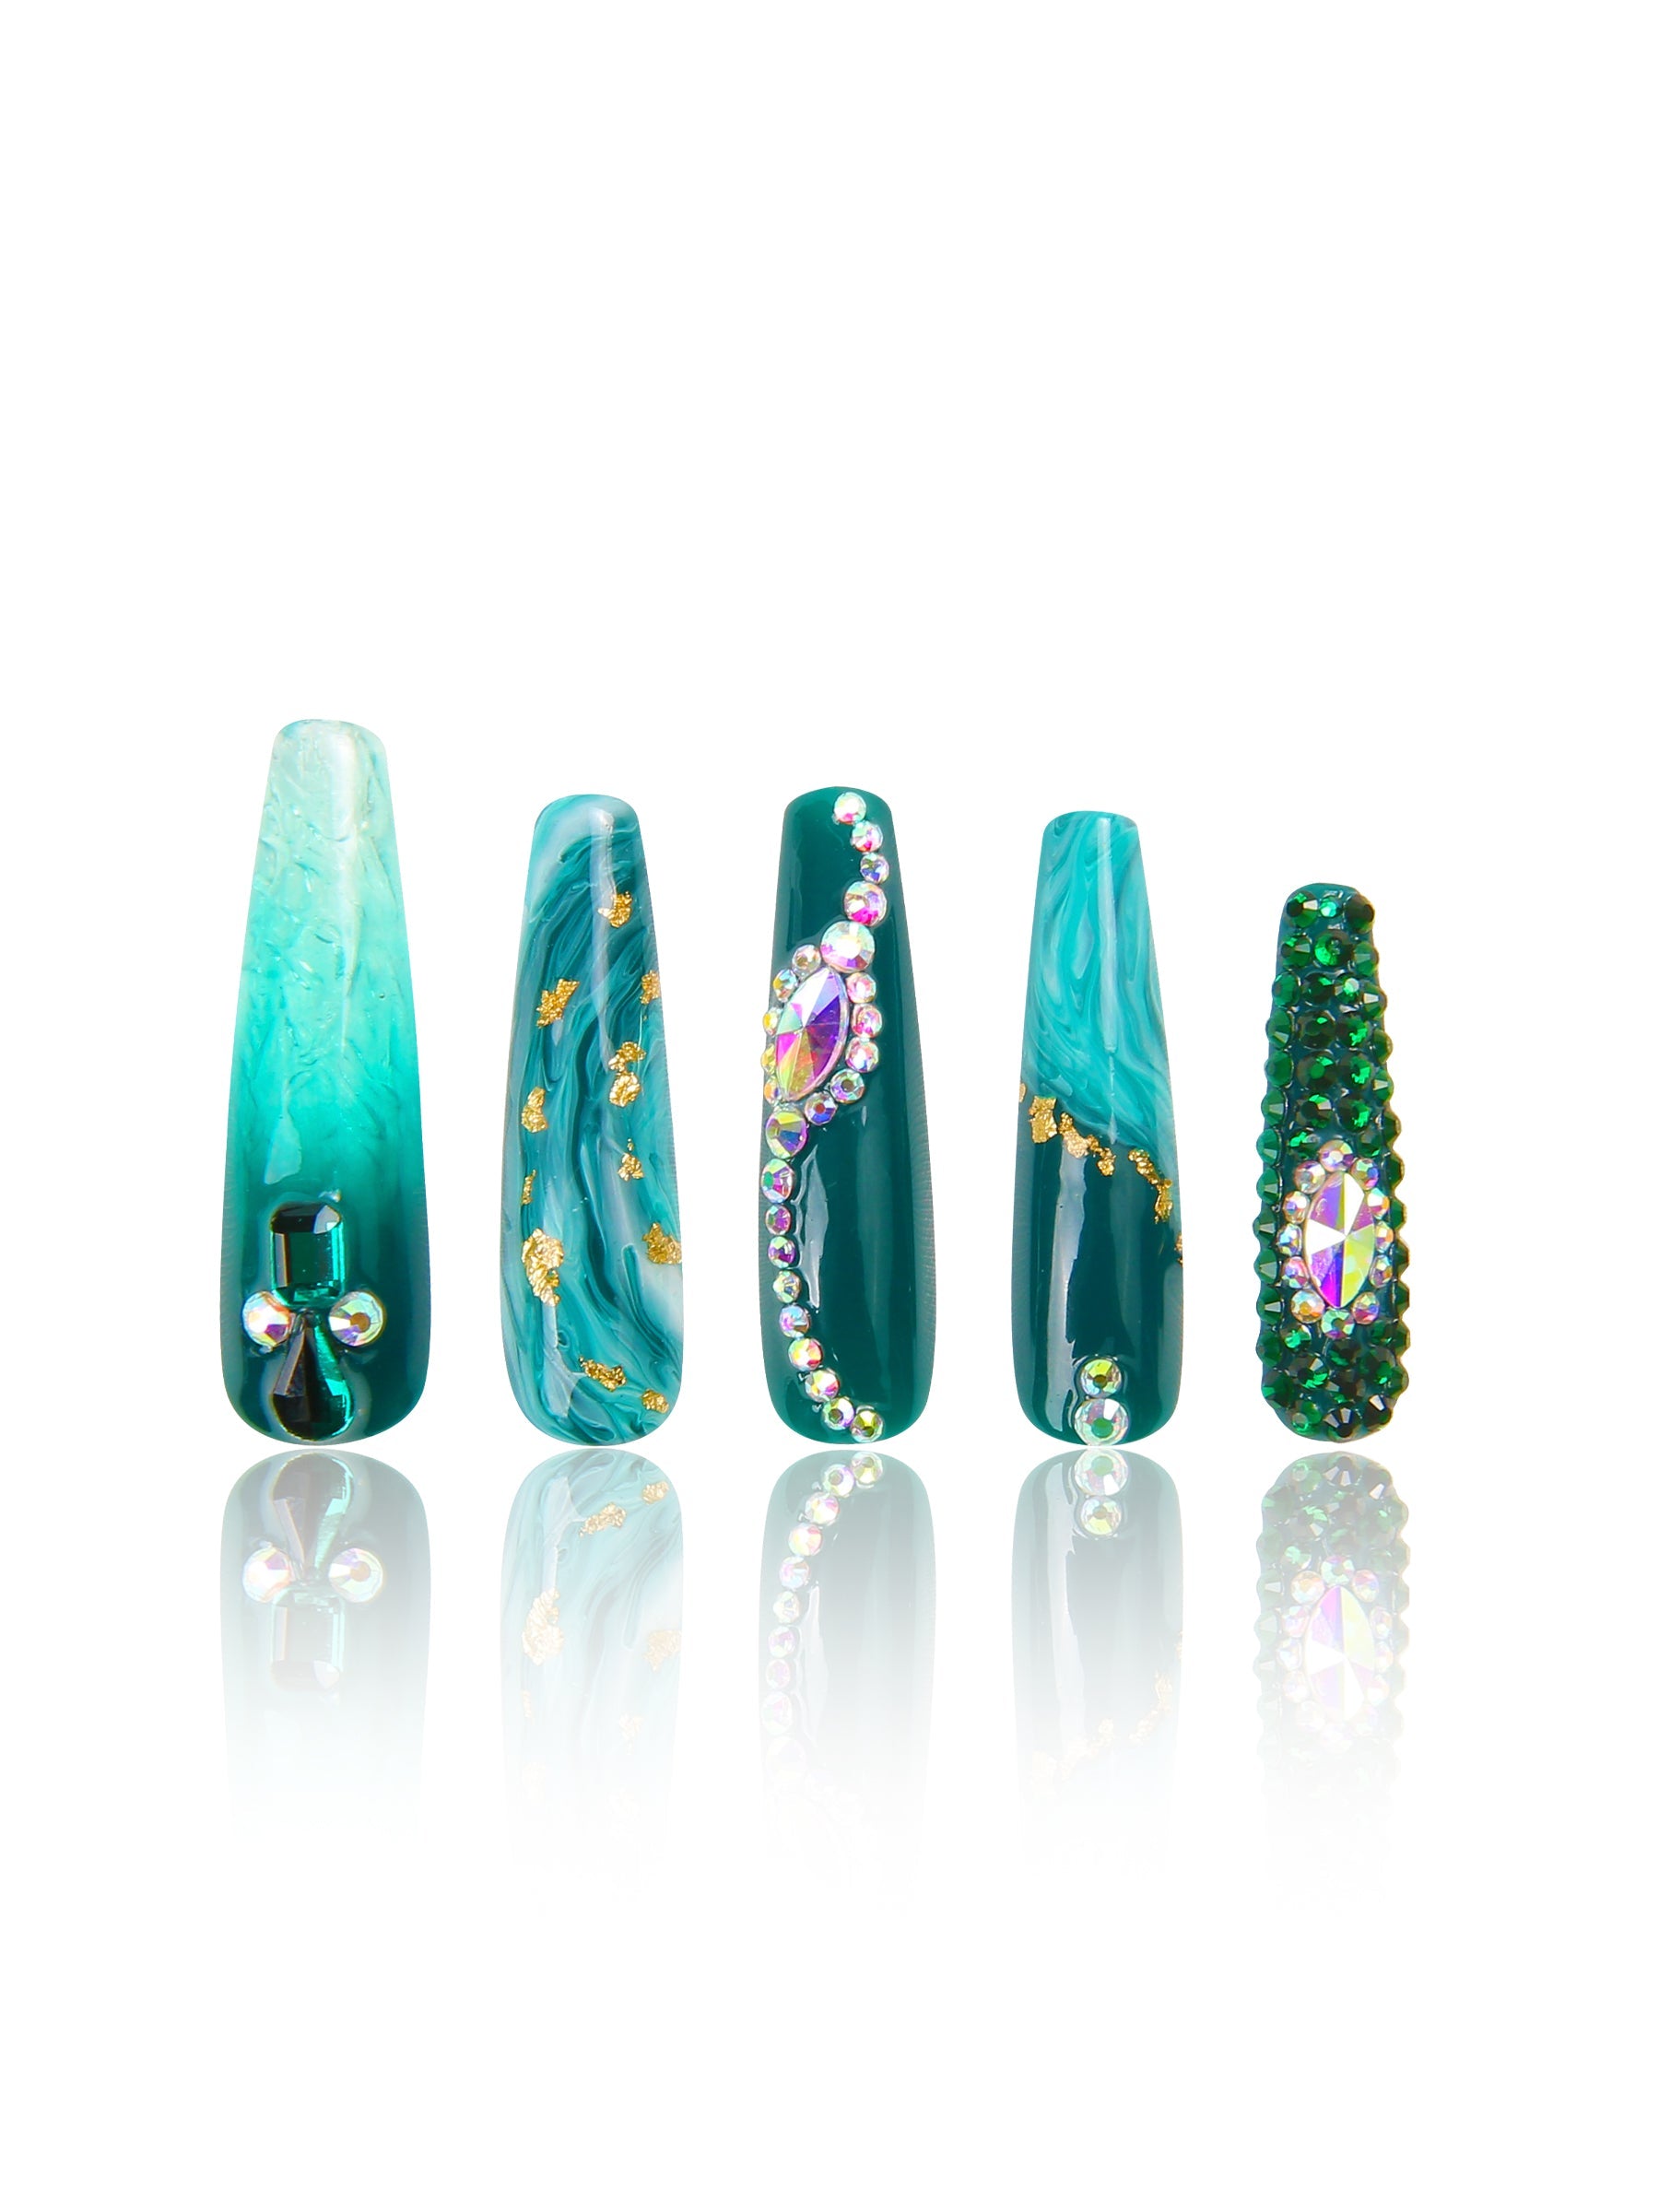 Five Emerald Envy press-on coffin nails with intricate gold decor, rhinestones, and gem embellishments in various shades of green. Designs capture the essence of lush foliage and nature's splendor.